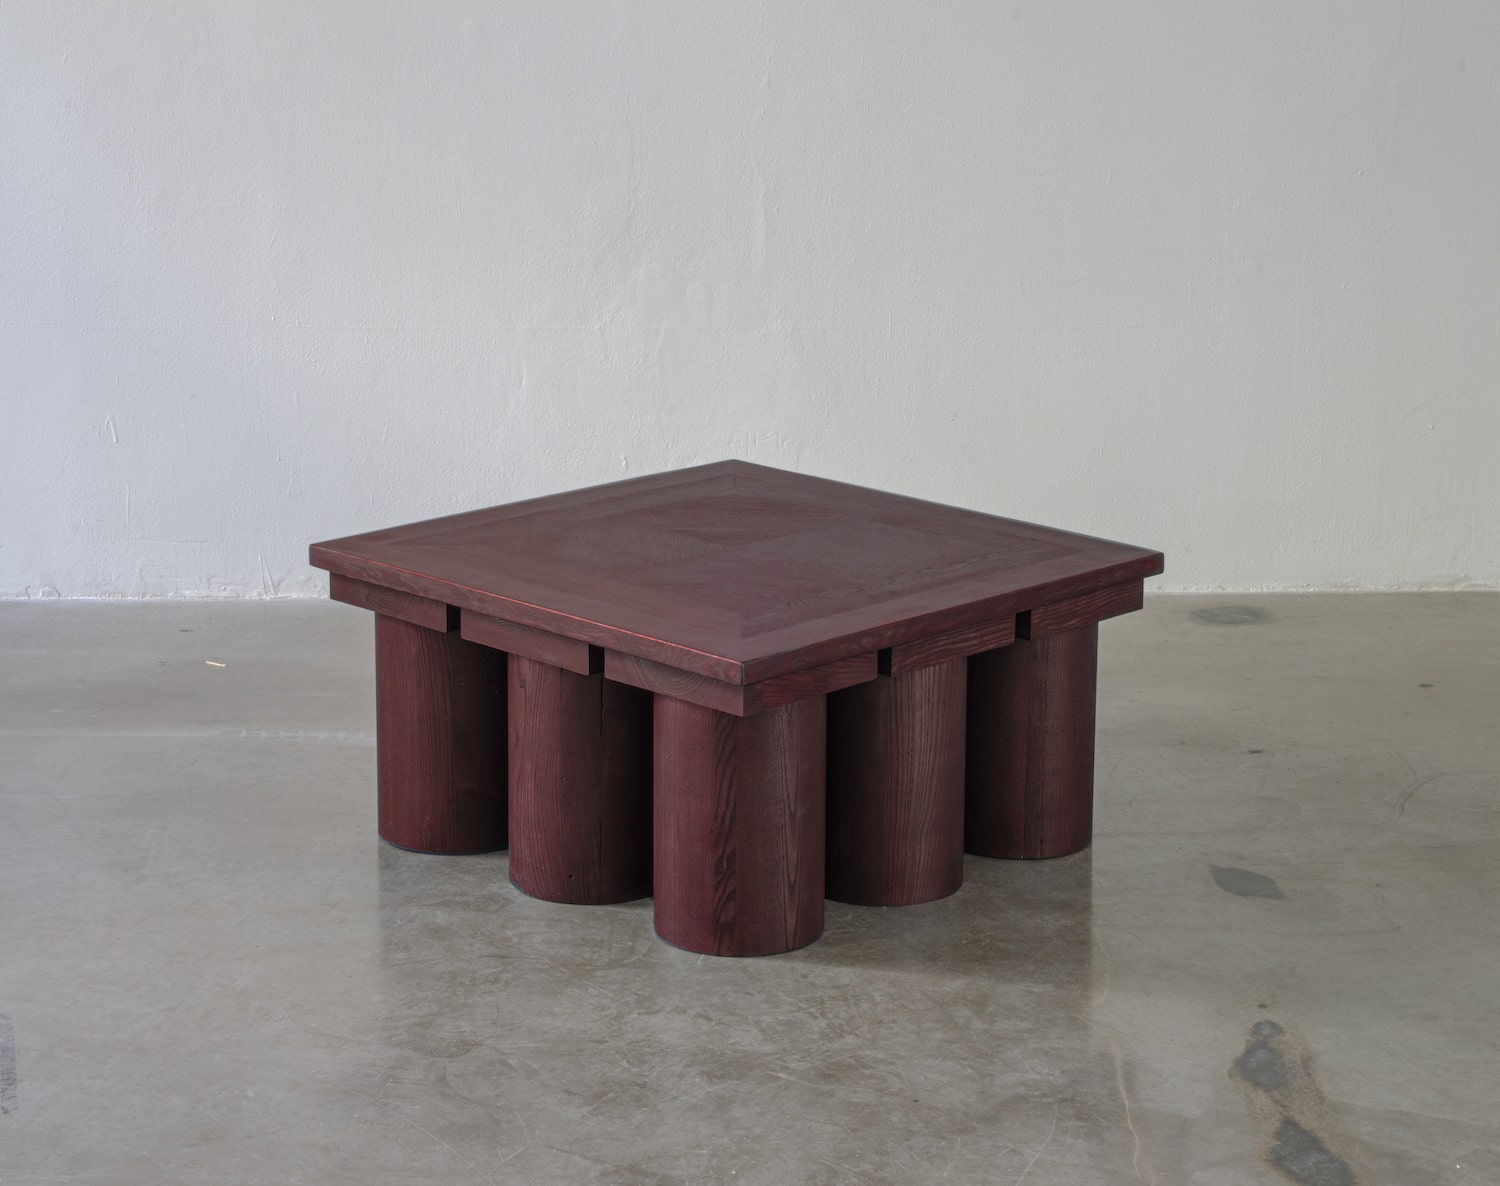 Veltrusy Mansion Low Table Inspired by Baroque and Classicist Architecture Made Out of Reclaimed Wood in Red